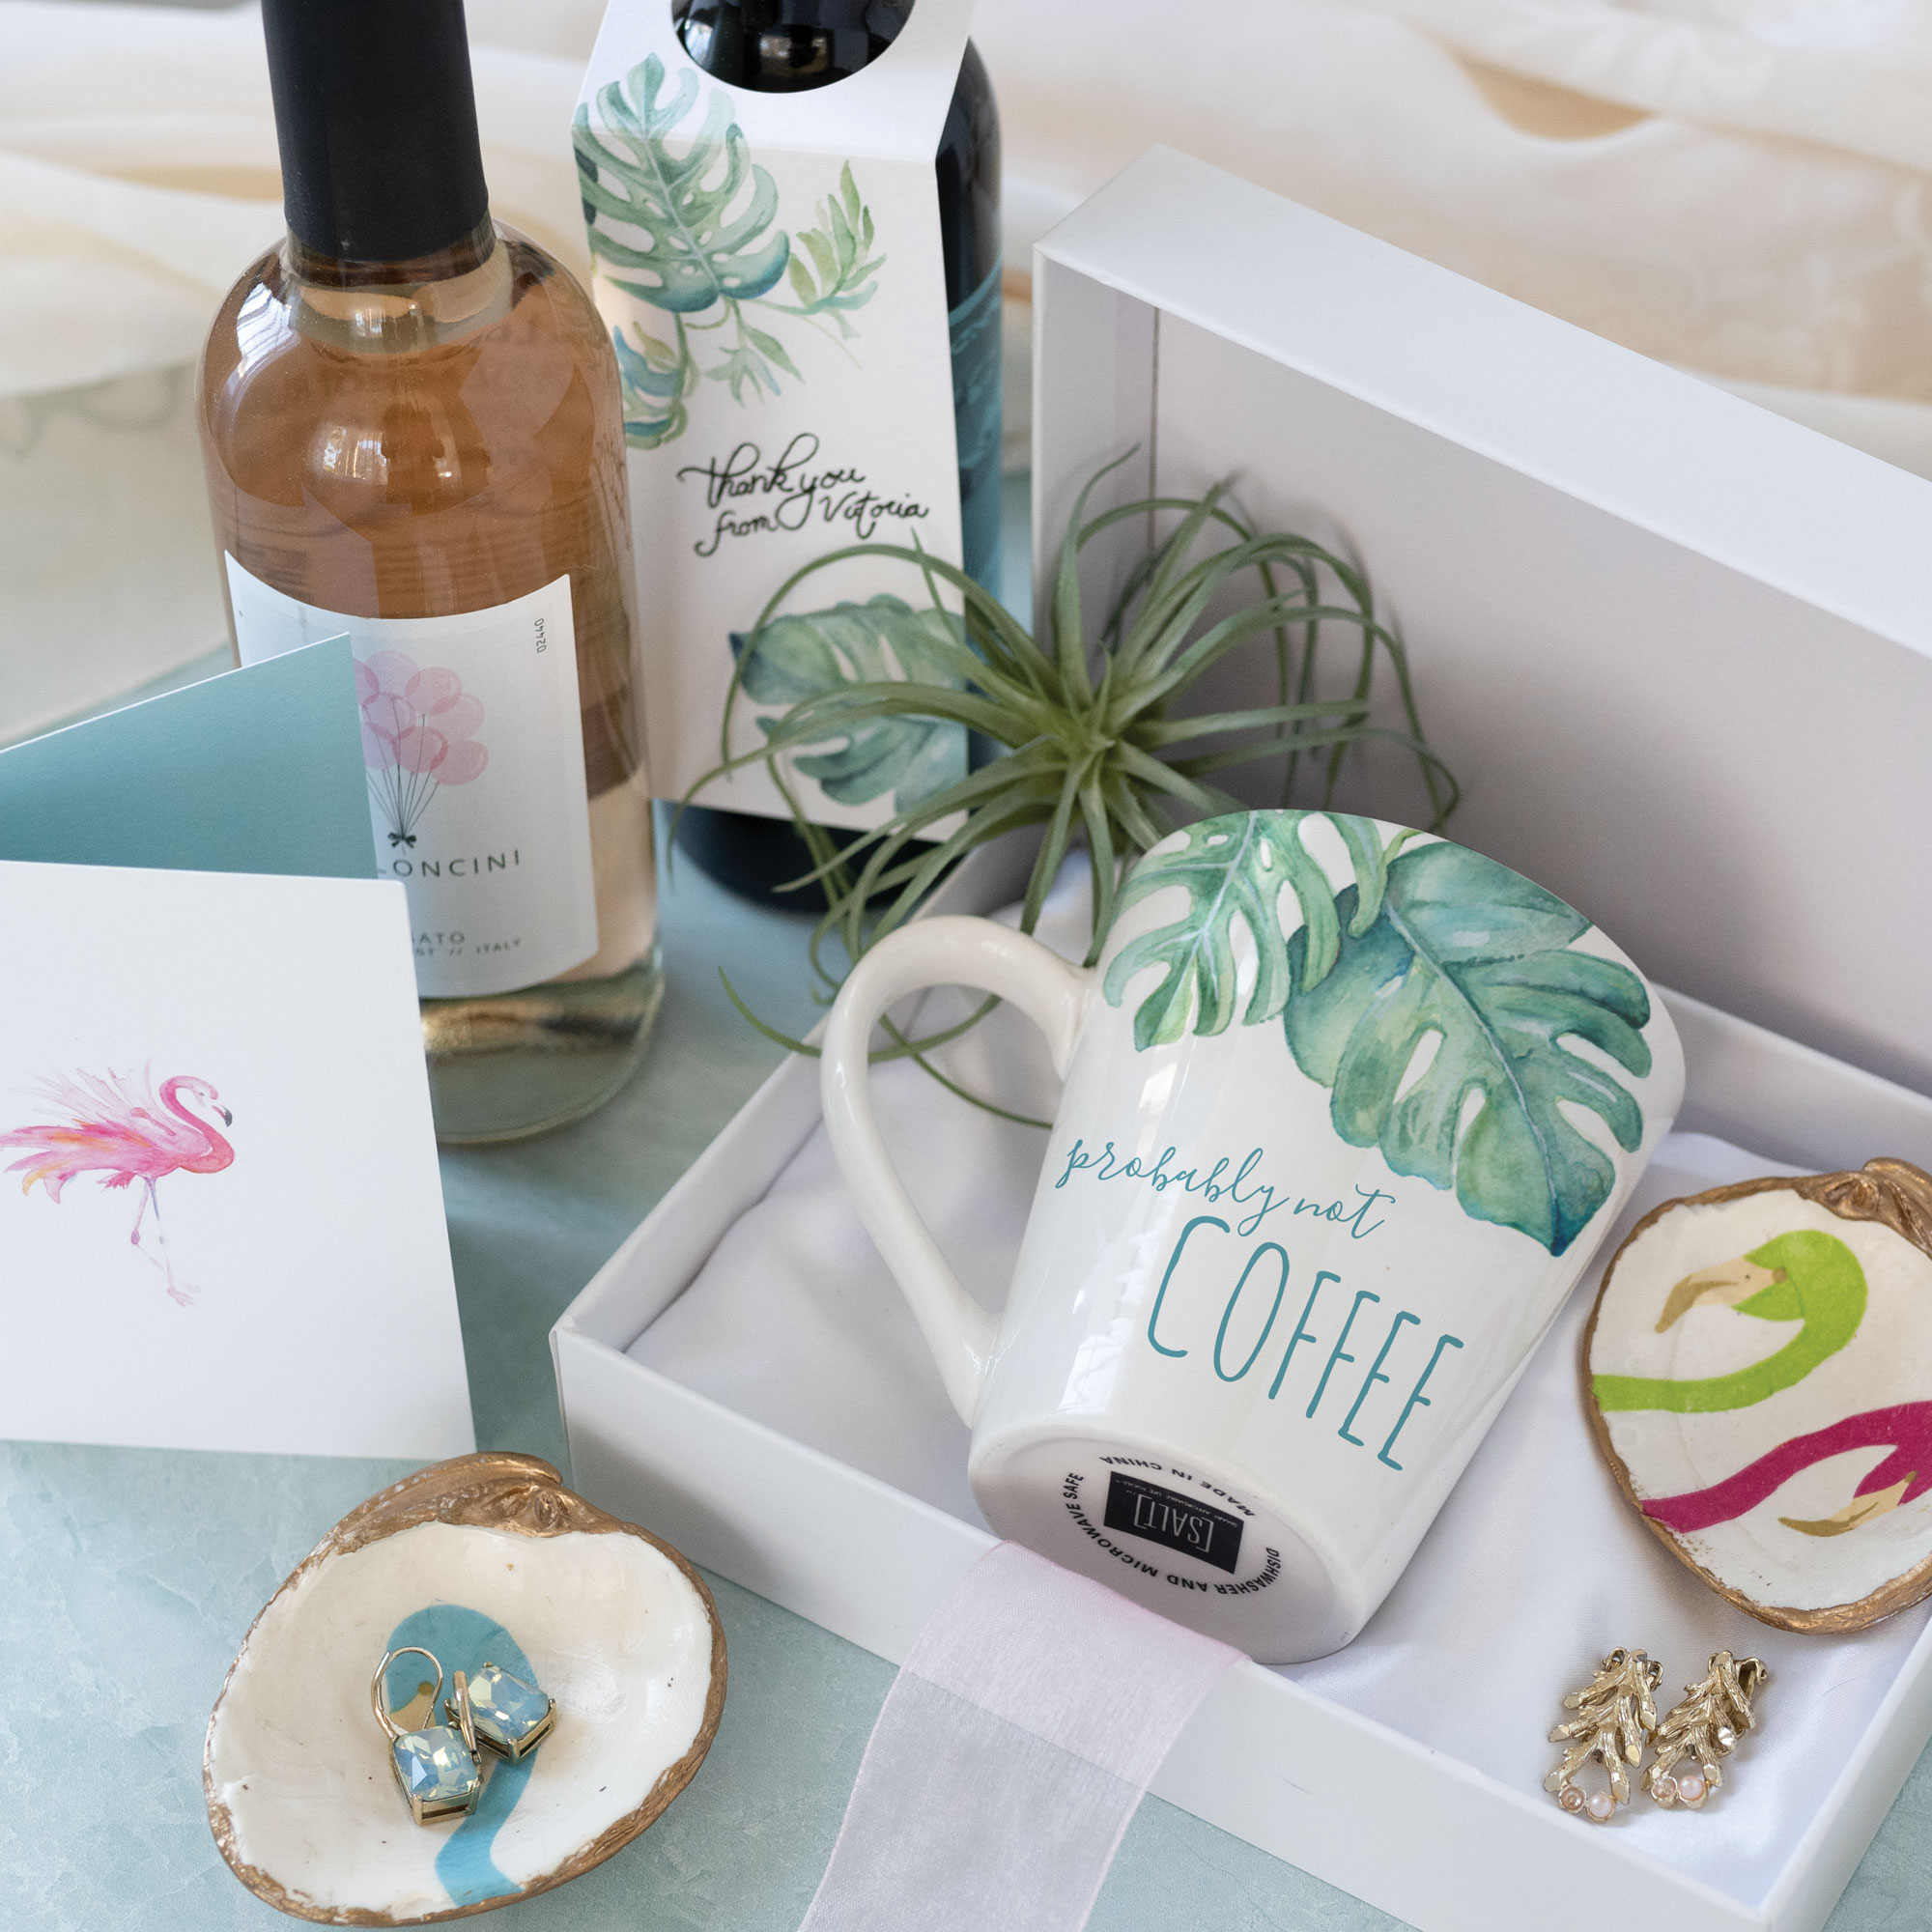 A cute gift box idea for your bridal party or friend features a tropical flair.